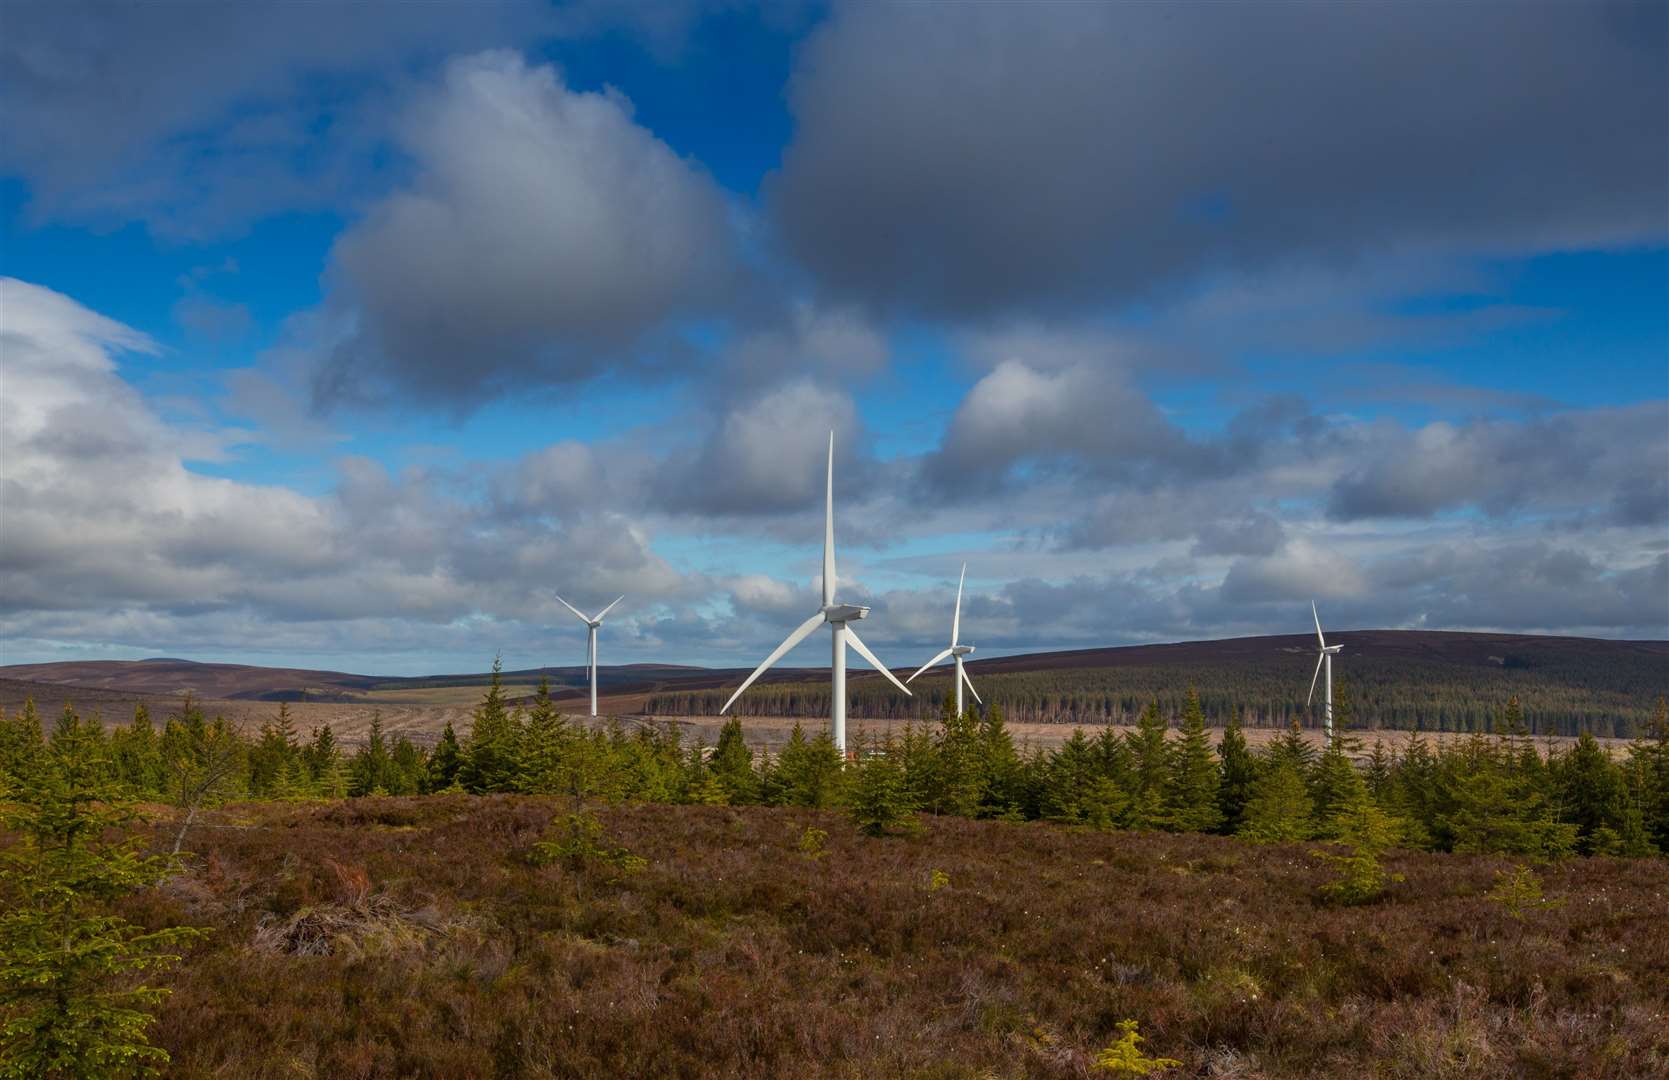 The wind farm could generate enough electricity annually for around 84,000 homes.